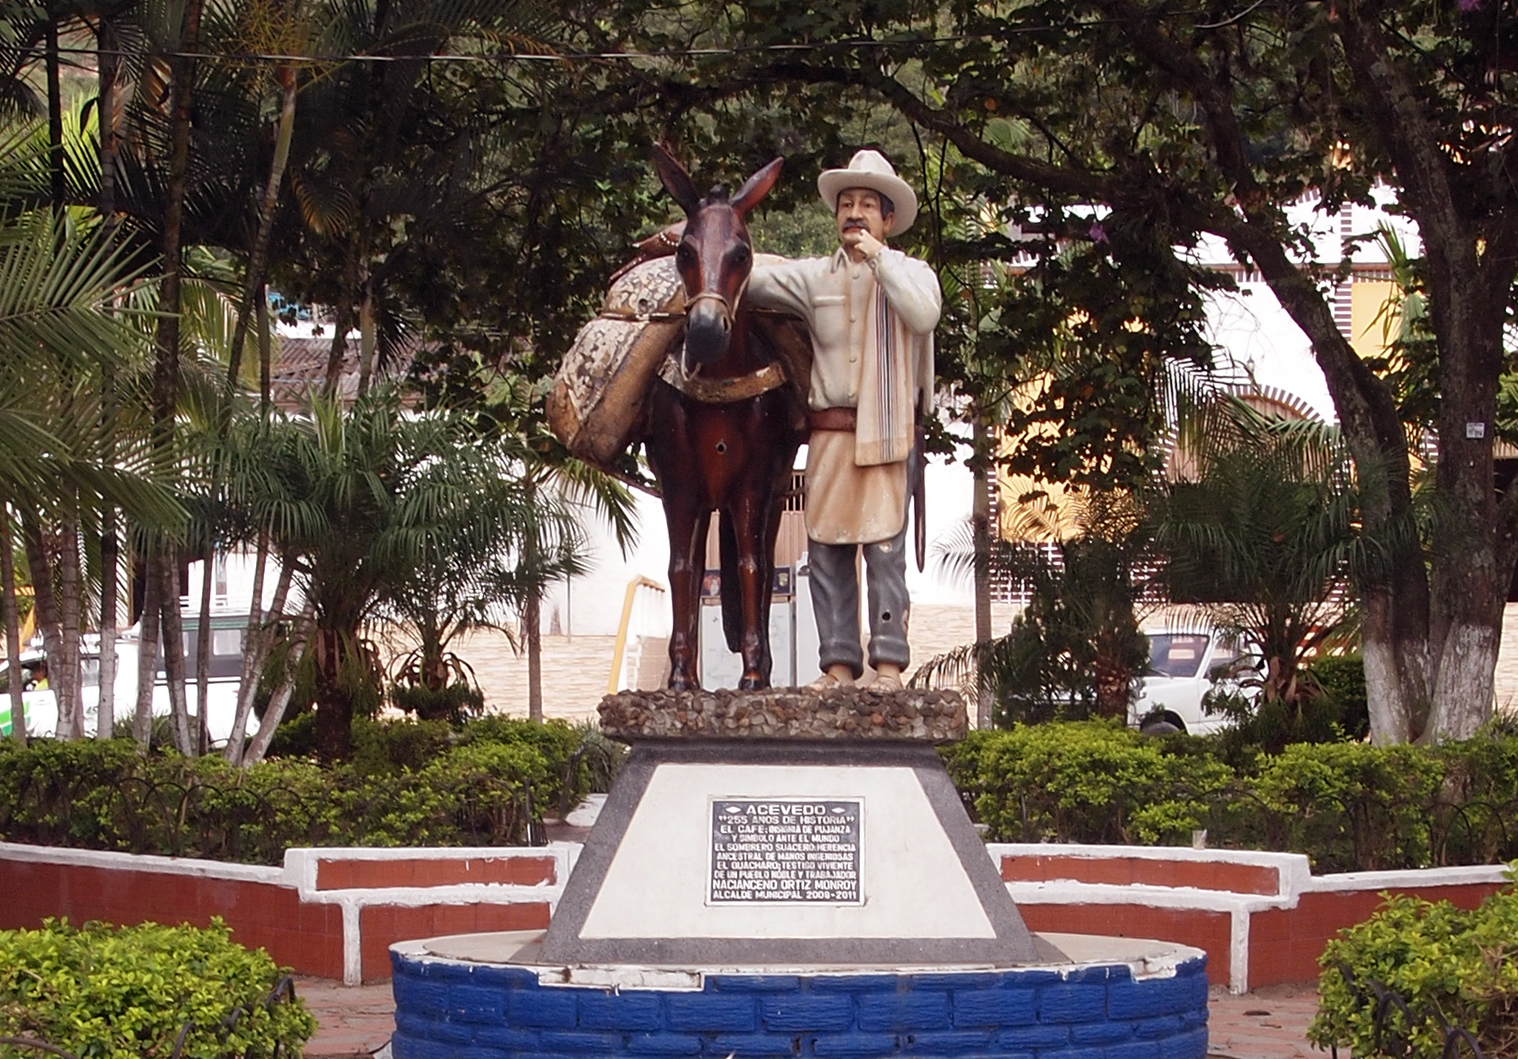 The plaza in Acevedo, Huila, Colombia, where coffee is bought and sold every day of the year.